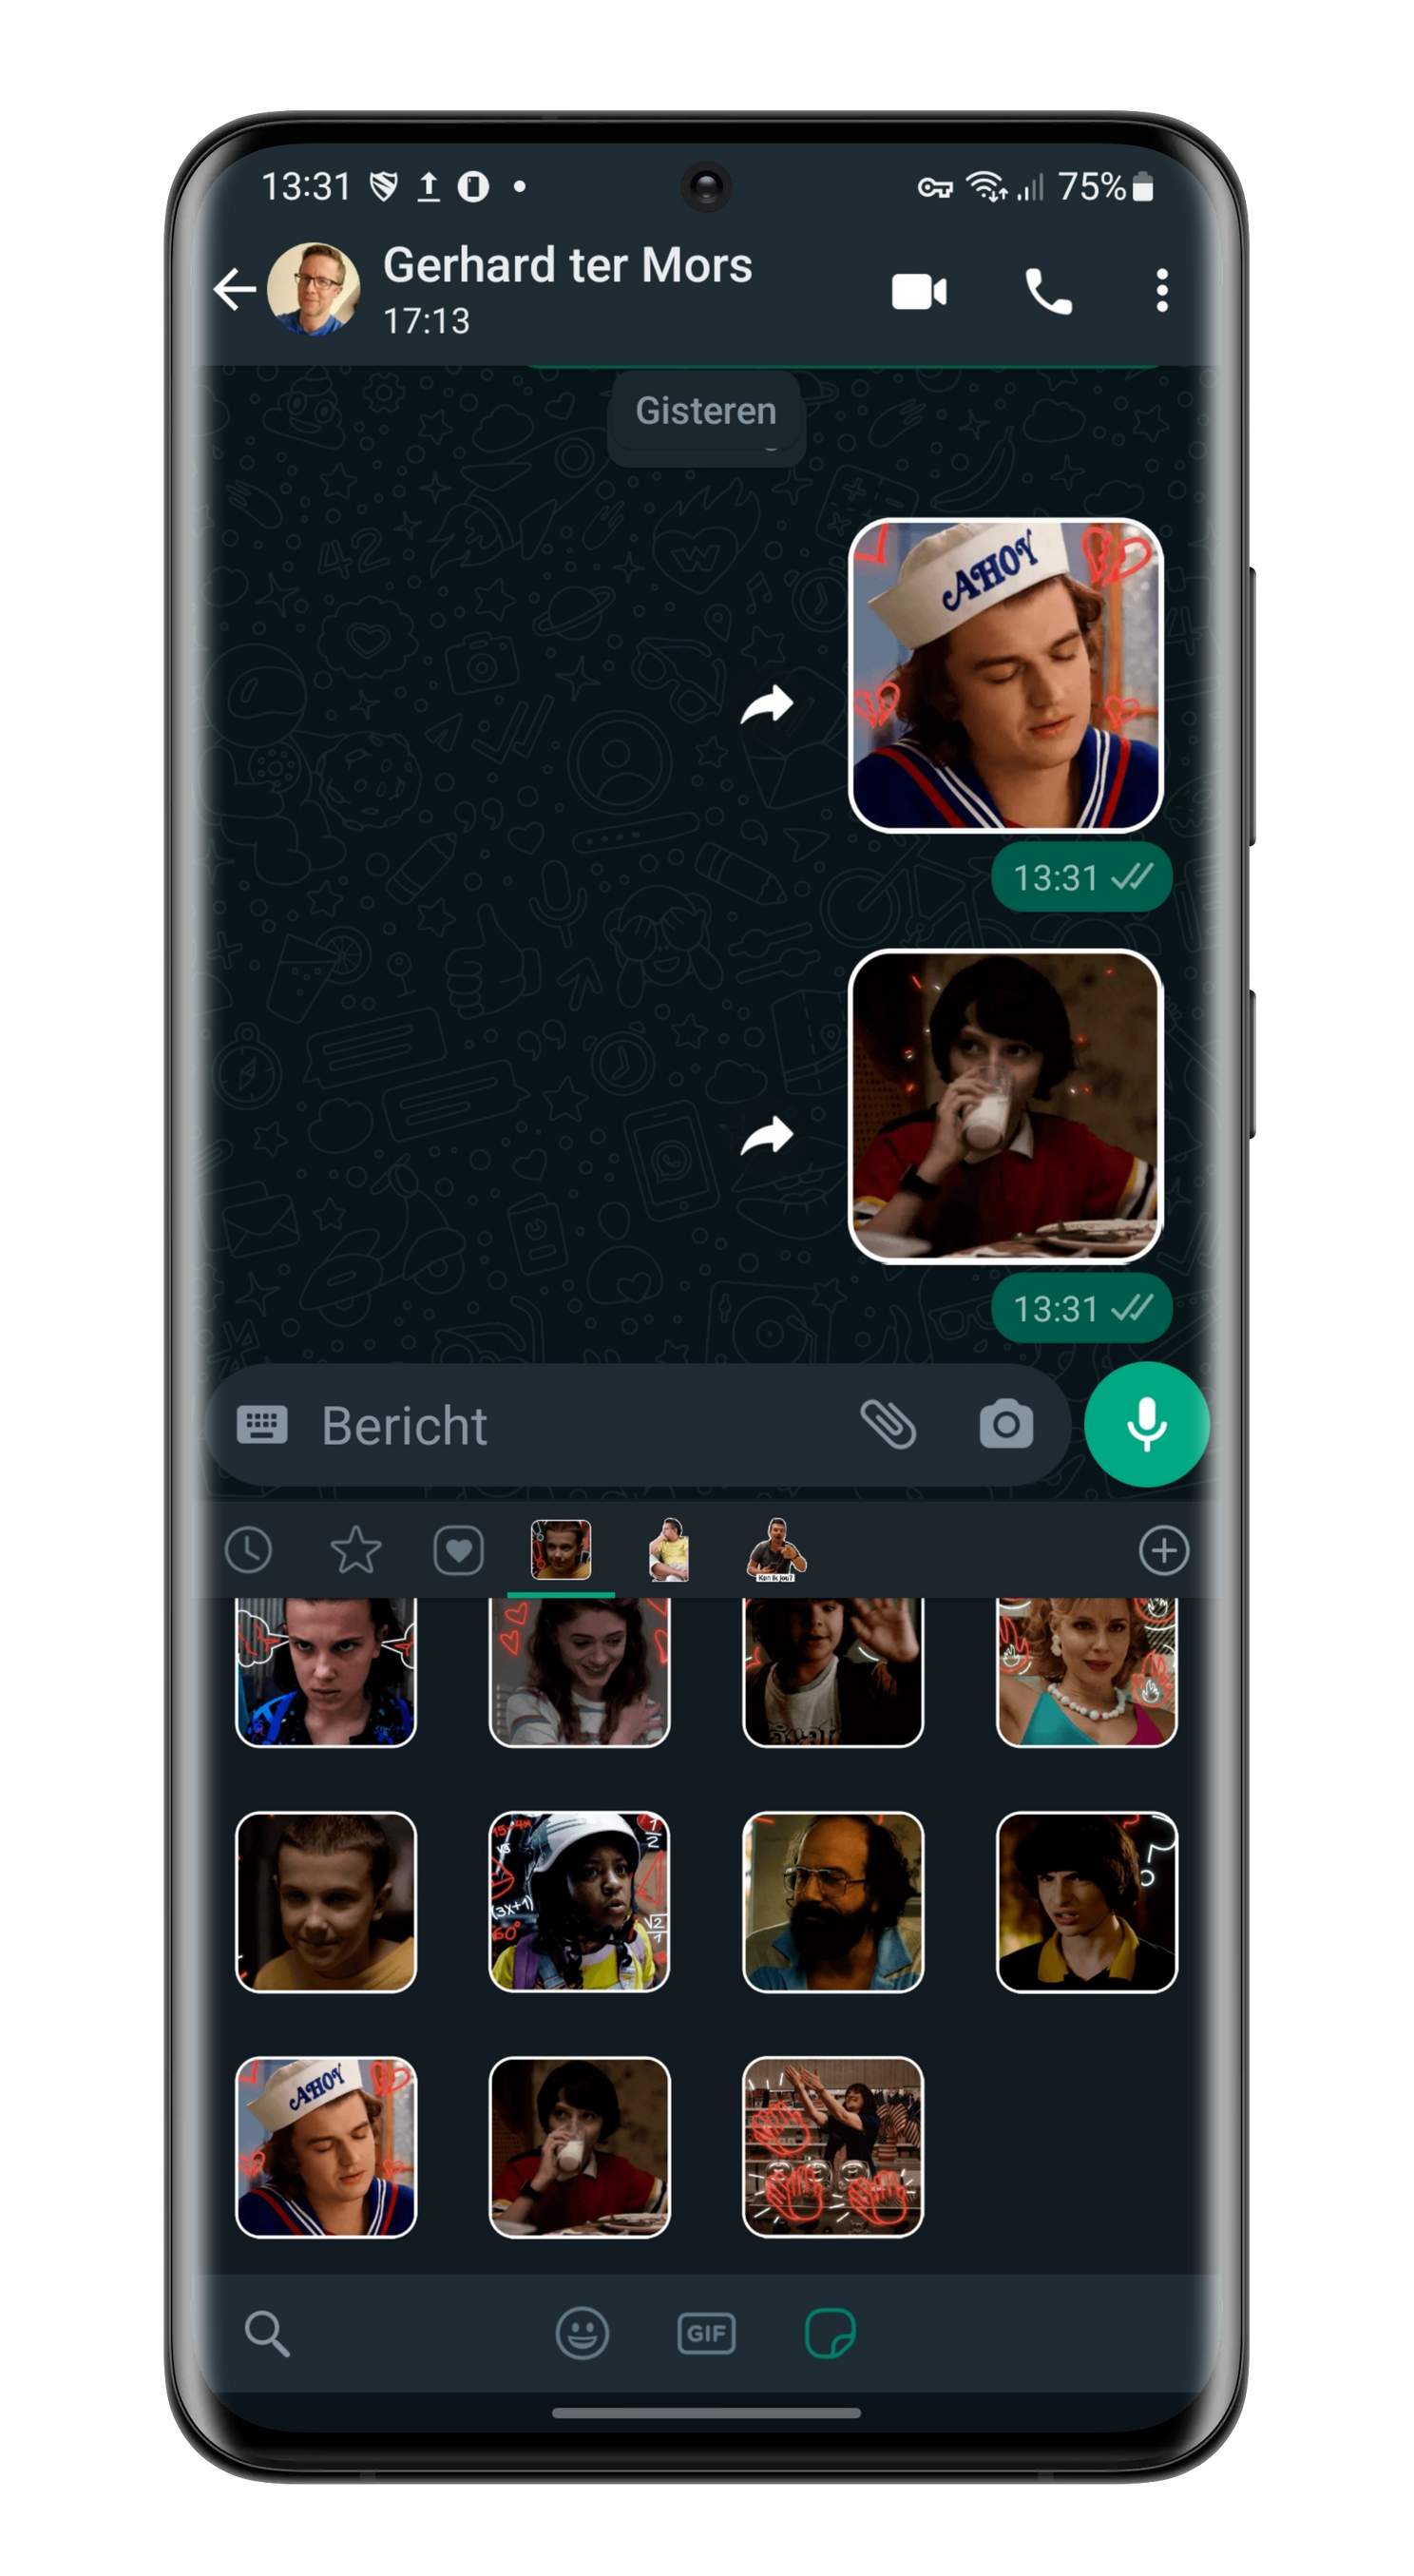 WhatsApp launches Stranger Things sticker pack, download the stickers here